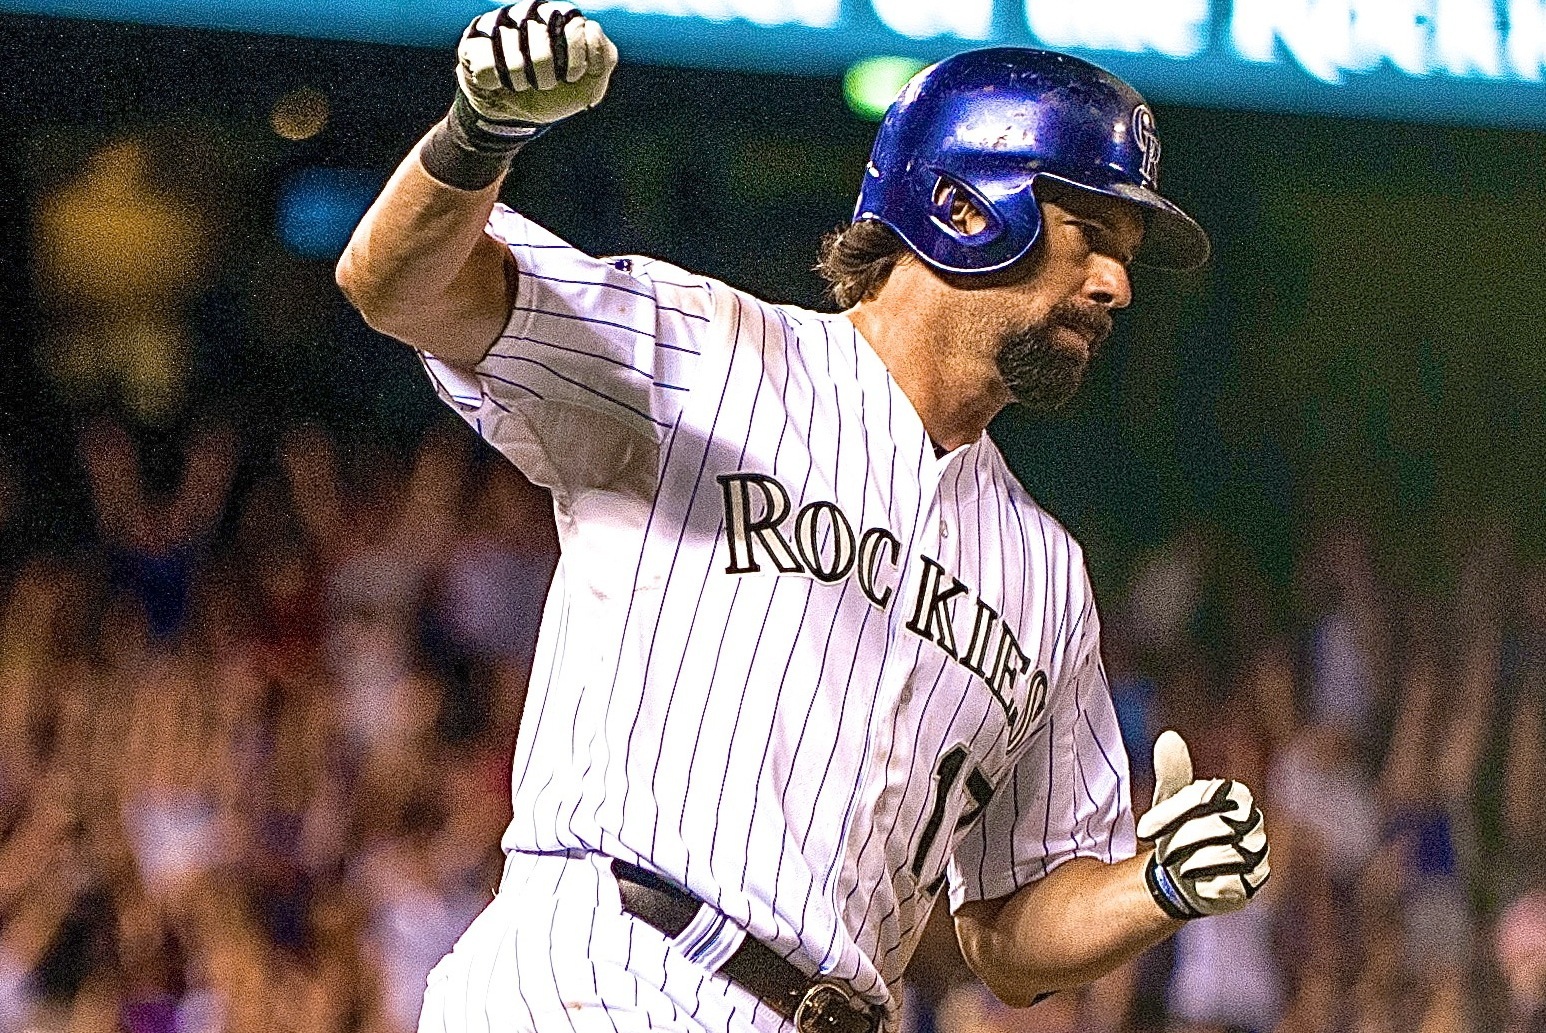 Rare breed: Colorado's Todd Helton has spent his whole career with Rockies